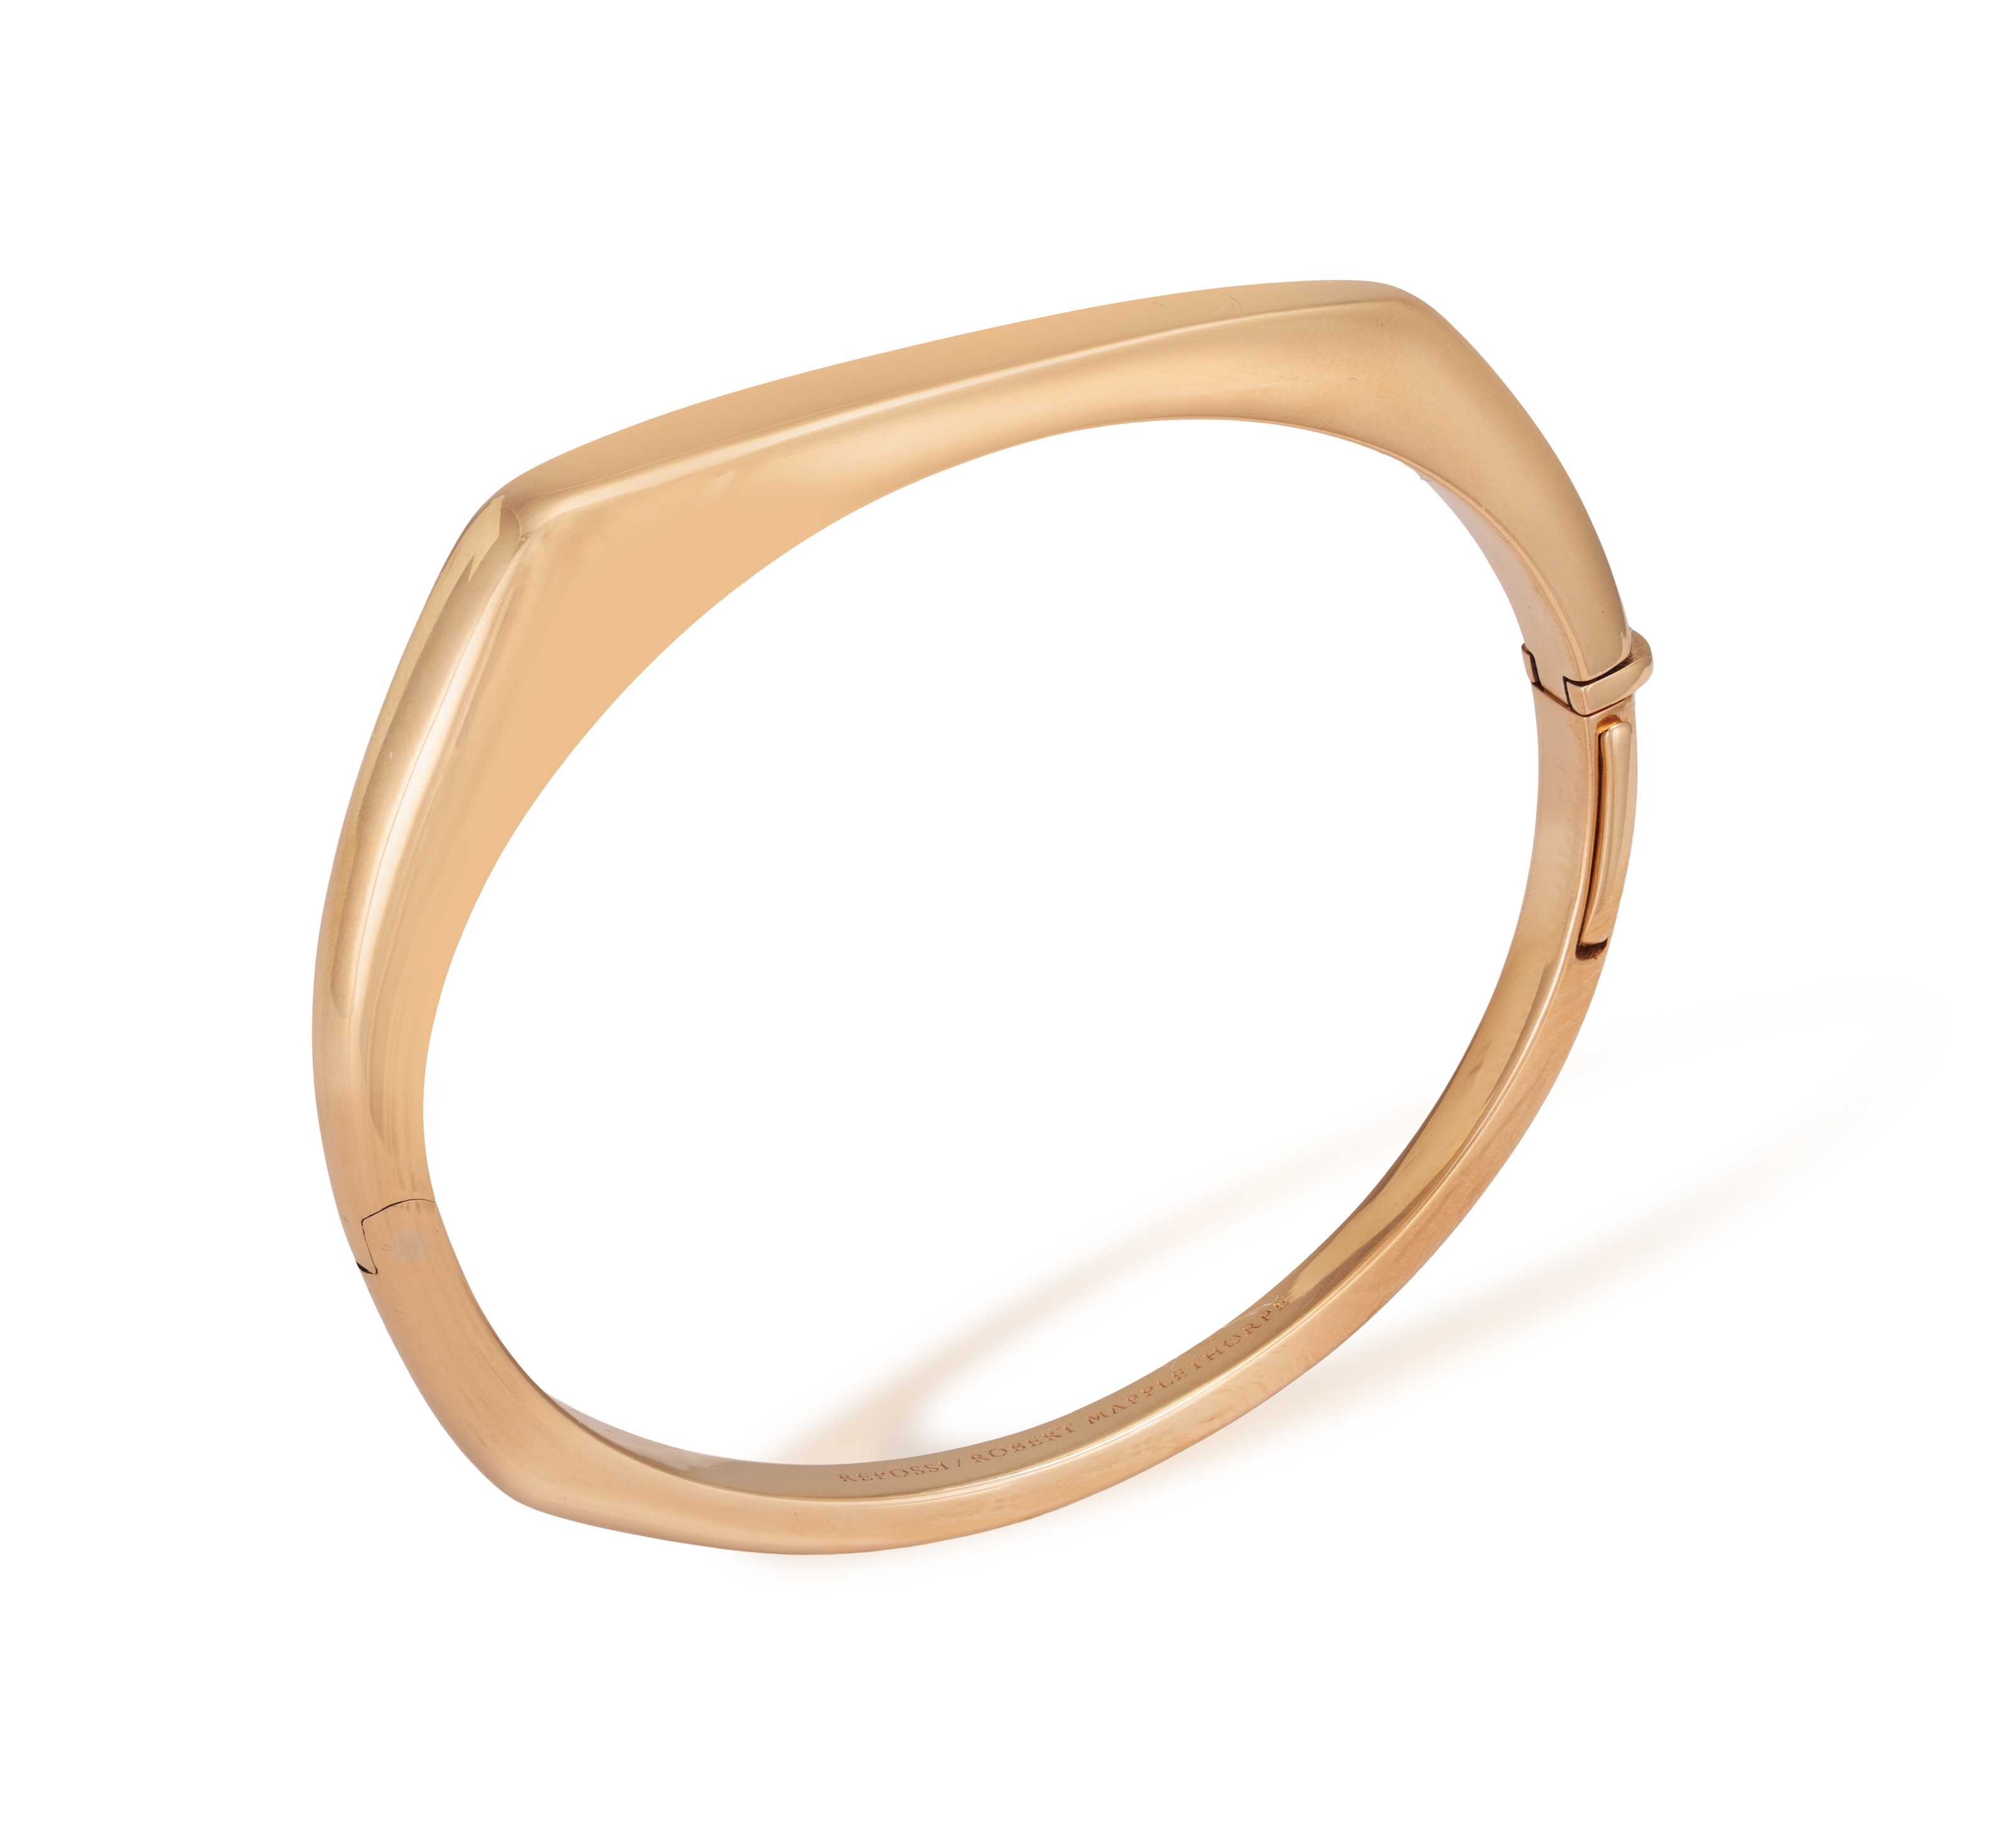 A GOLD 'ROBERT MAPPLETHORPE' BANGLE, DESIGNED BY GAIA REPOSSI, FOR REPOSSI Limited Edition,